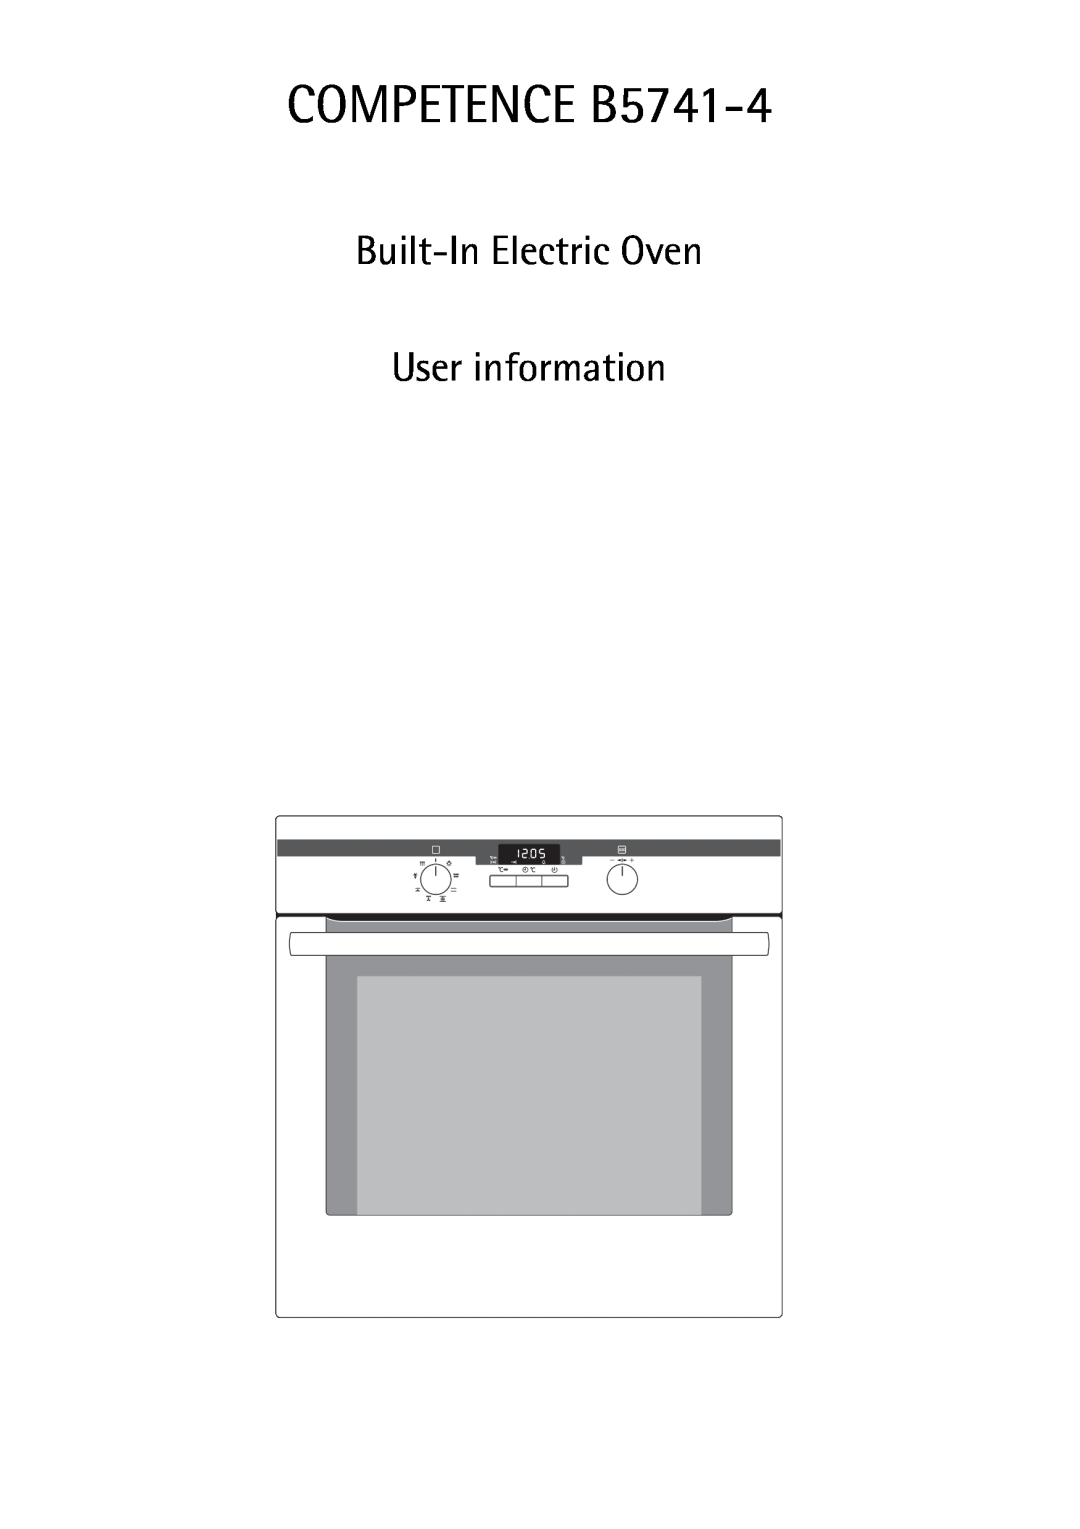 Electrolux manual COMPETENCE B5741-4, Built-In Electric Oven User information 